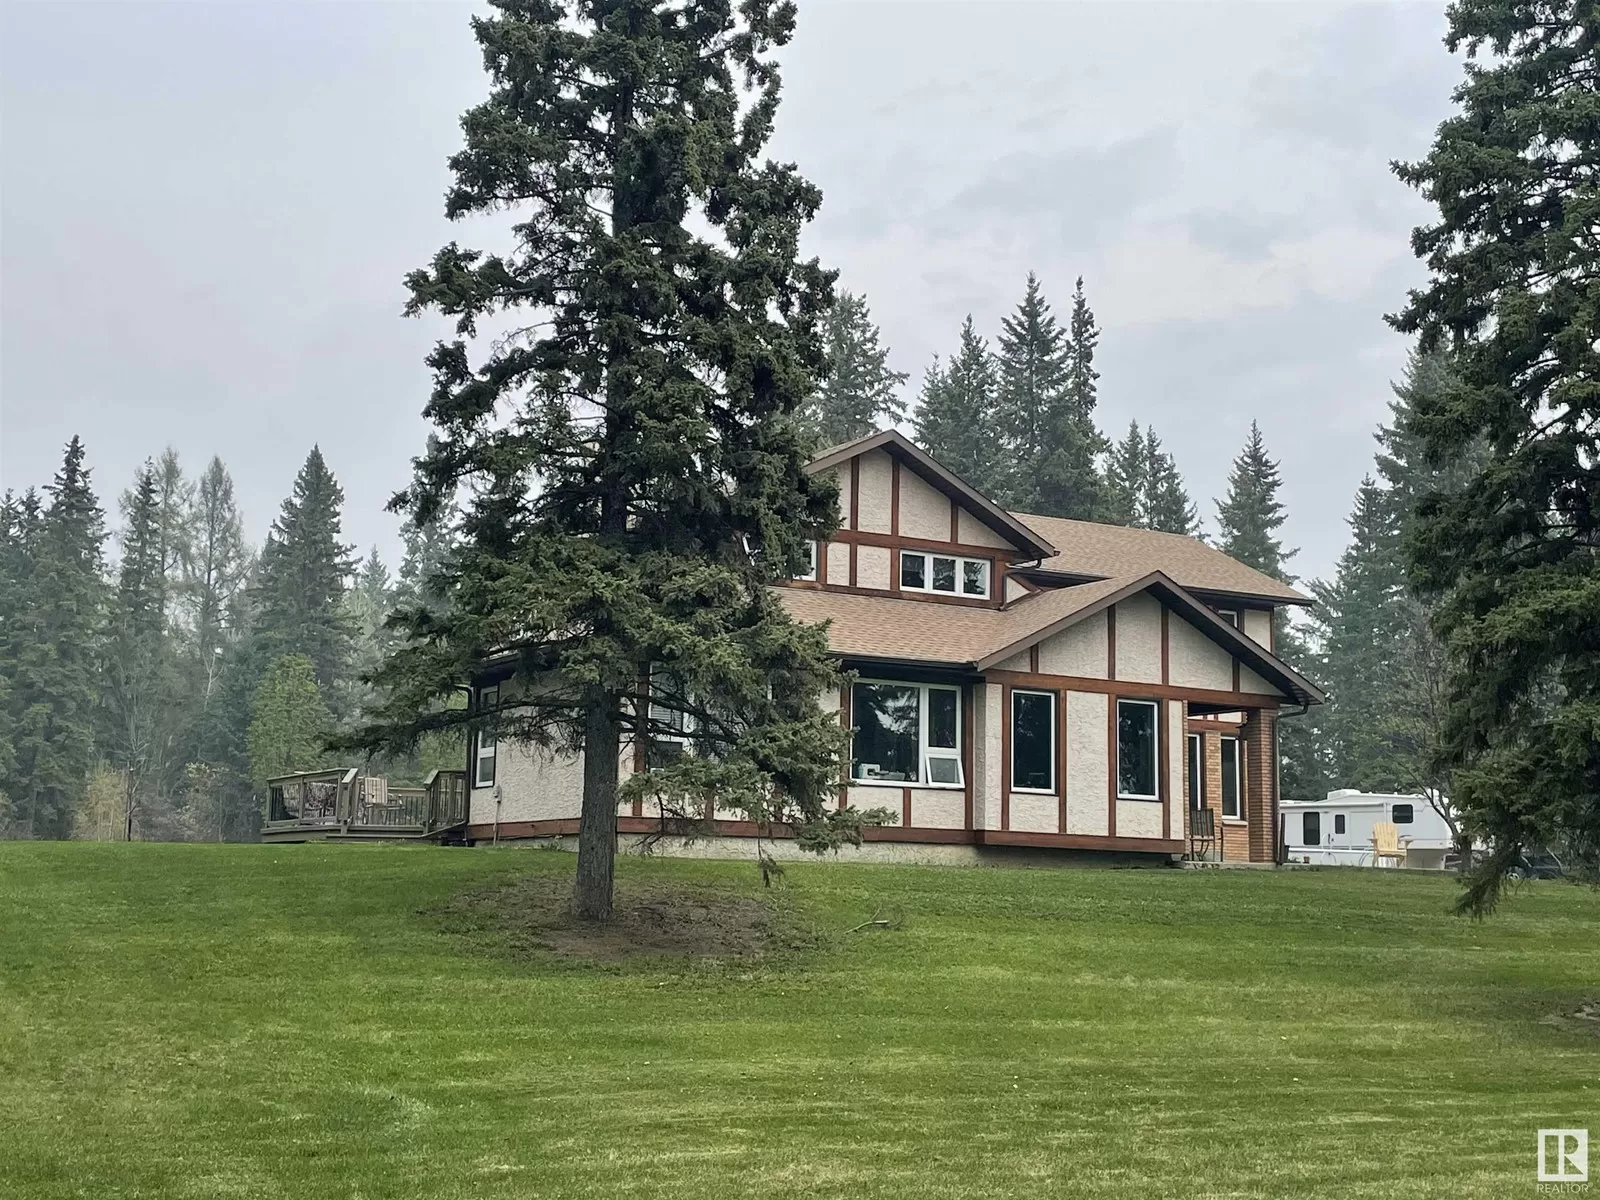 House for rent: 6204 Hwy 39, Rural Brazeau County, Alberta T7A 1Z0